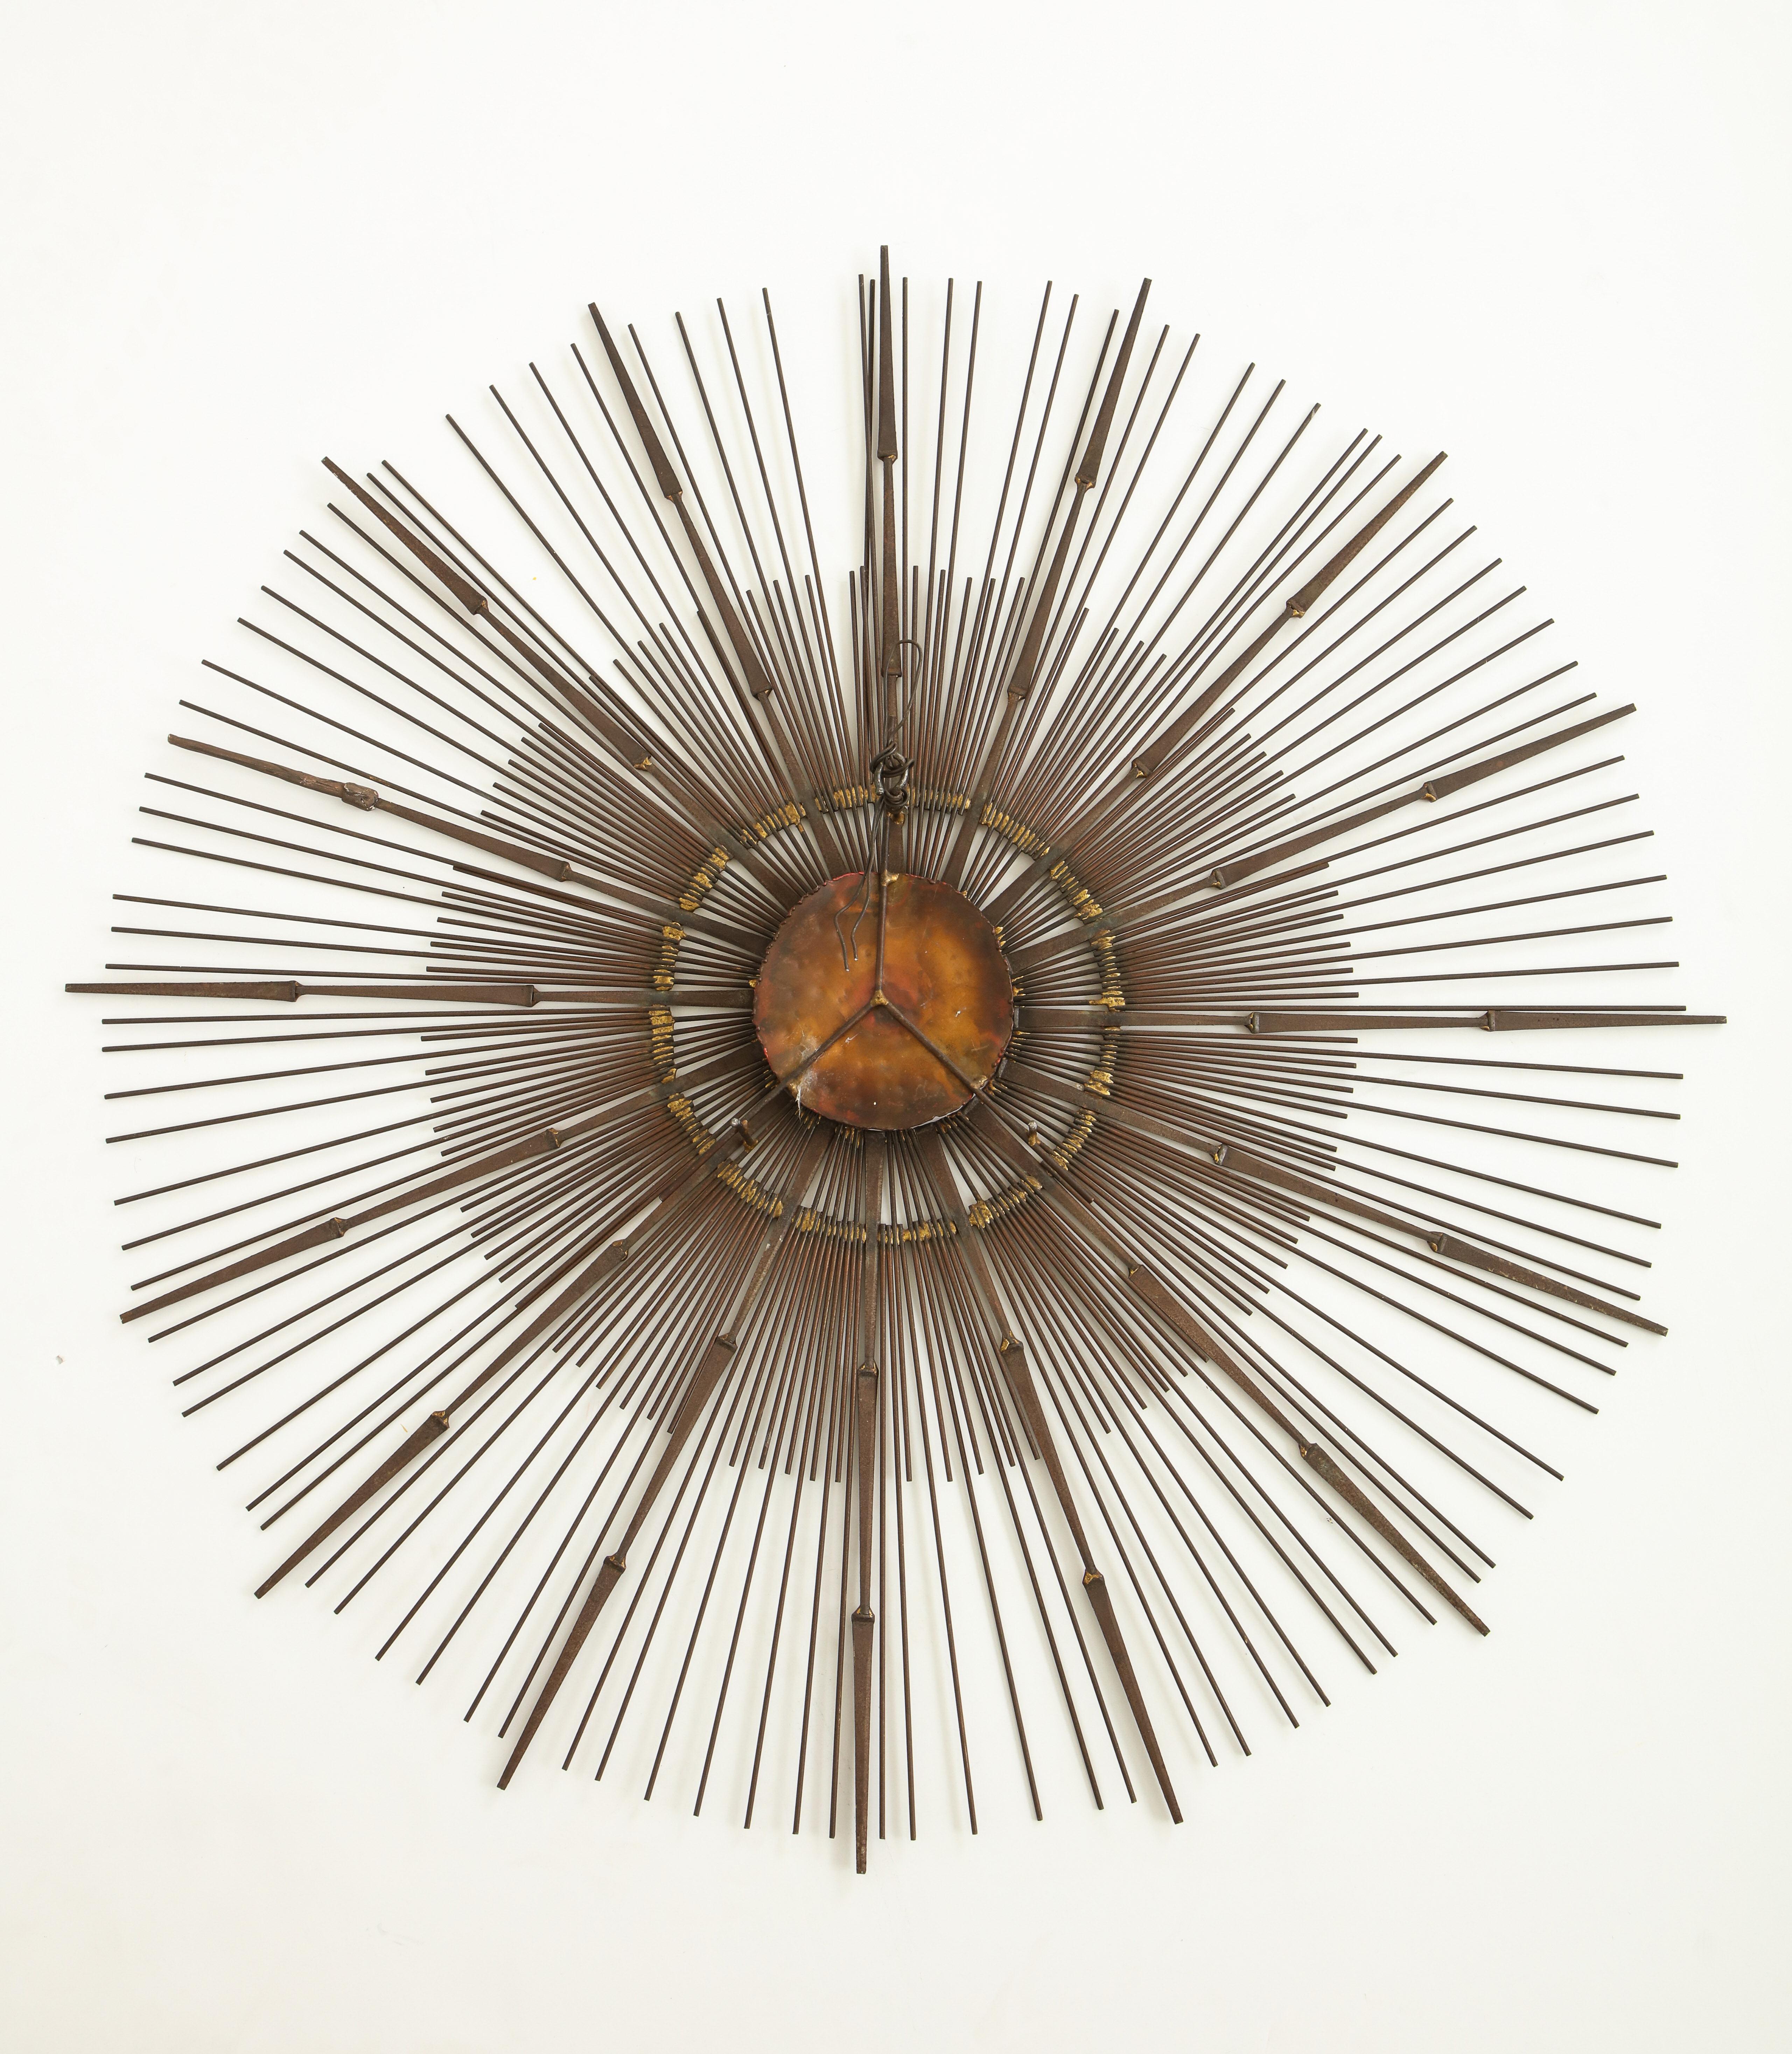 Brass wall sunburst sculpture by Curtis Jere, having one tier of rounded rods and one tier of pointed rods radiating around a central copper disc.